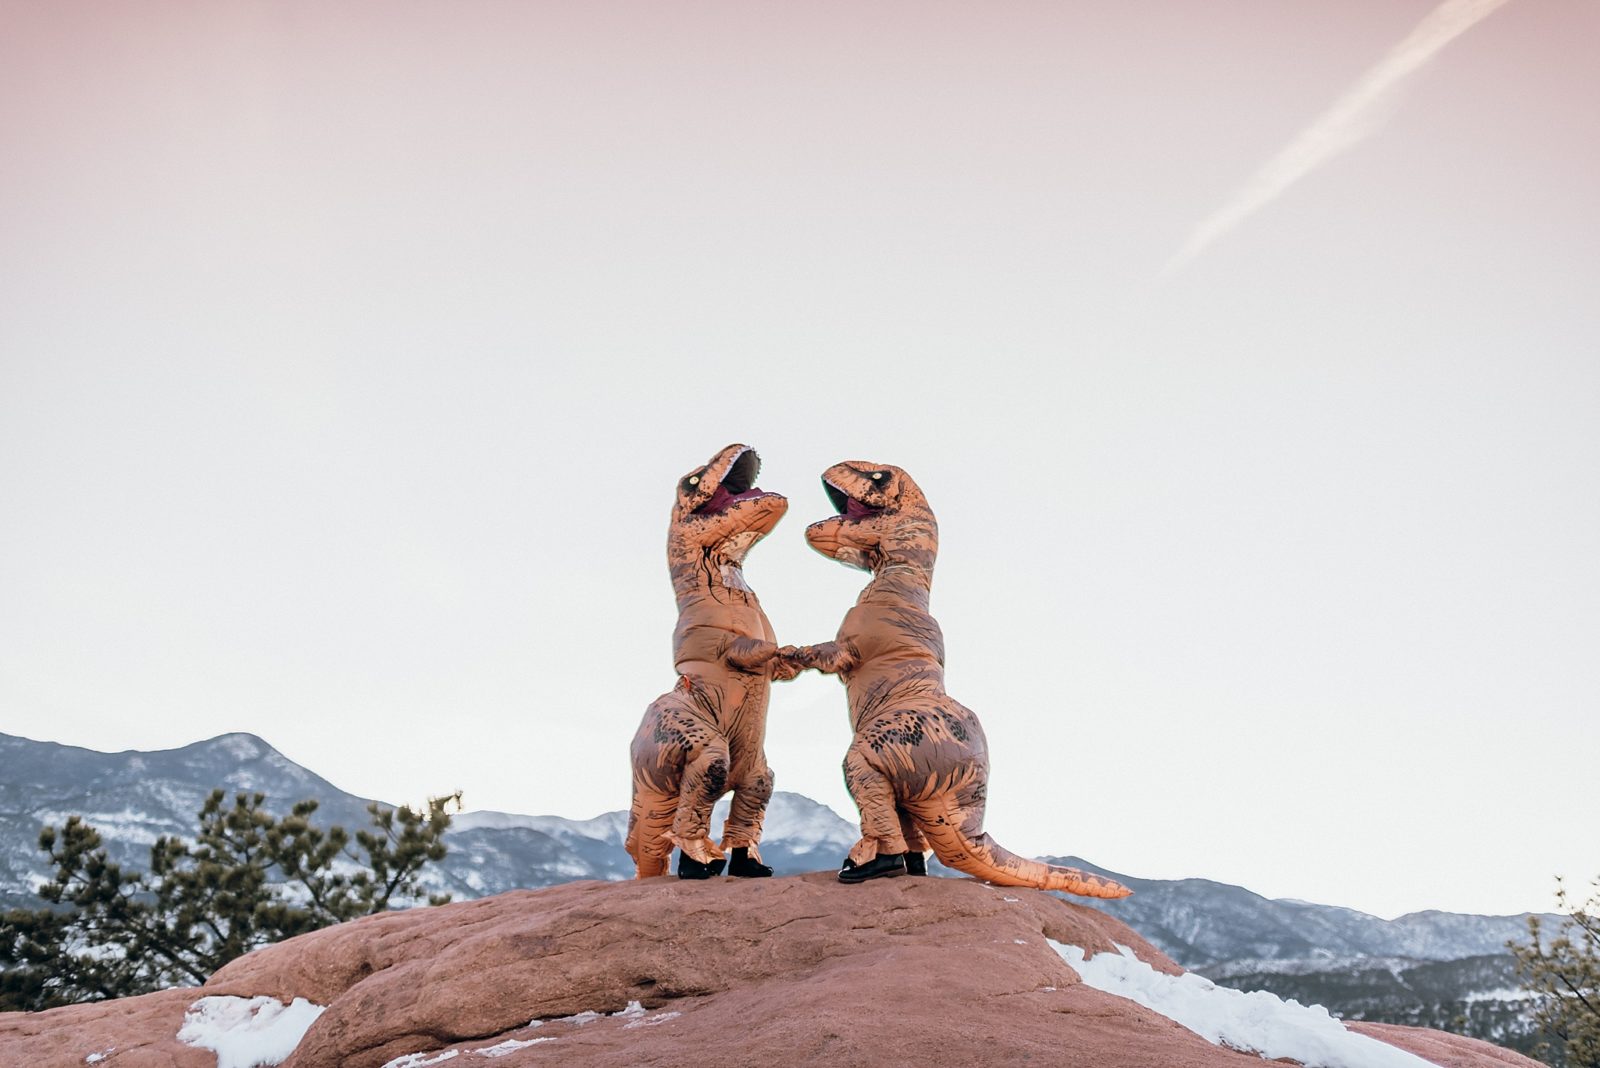 Engagement Session with Dinosaur Costumes